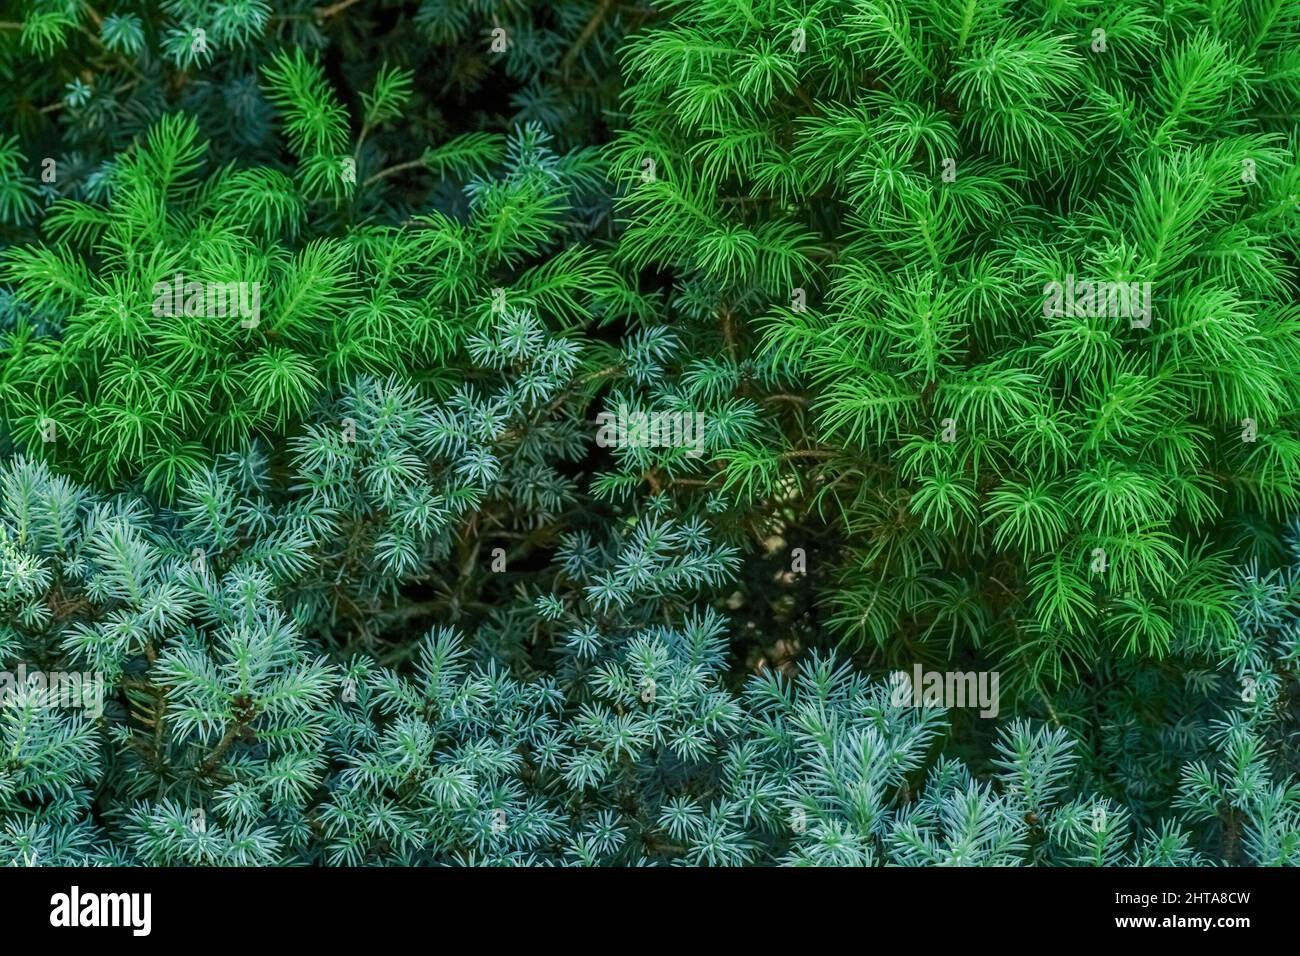 Green and blue spruce needles texture wallpaper, green natural background Stock Photo